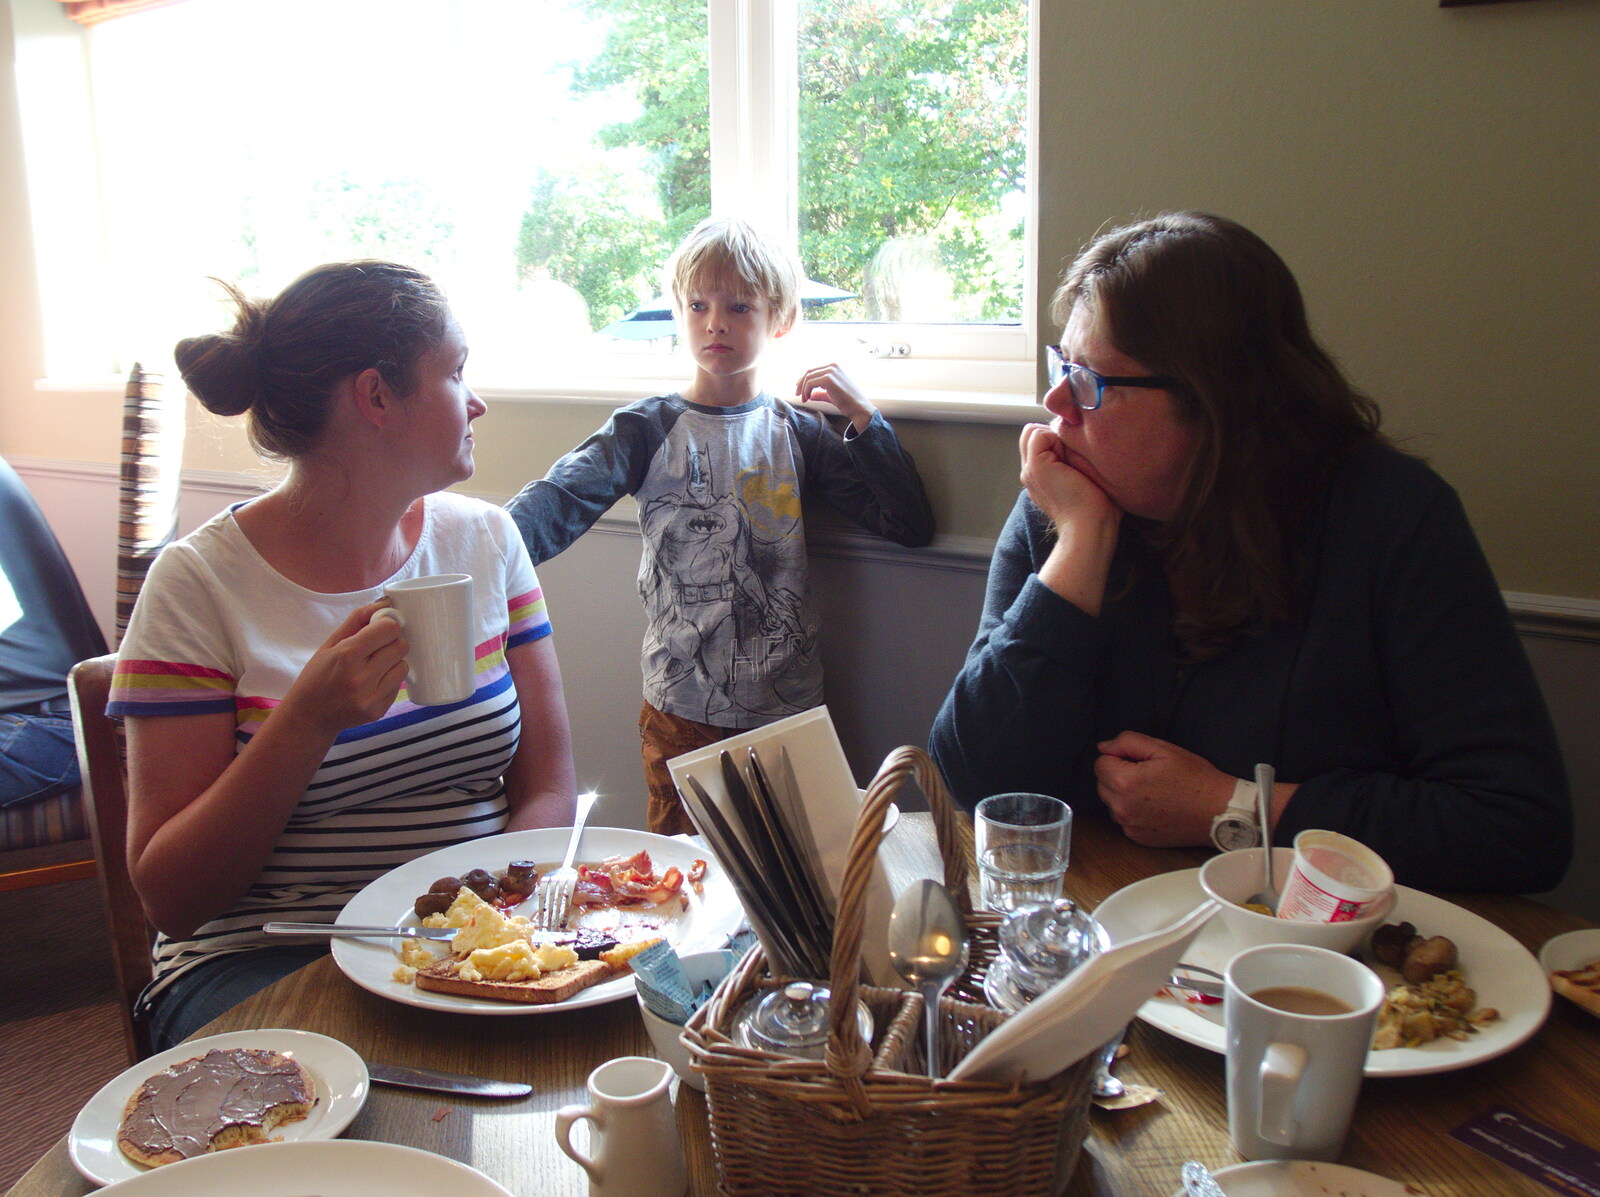 The next day, Sis joins us for breakfast from A Day with Sean and Michelle, Walkford, Dorset - 21st September 2019